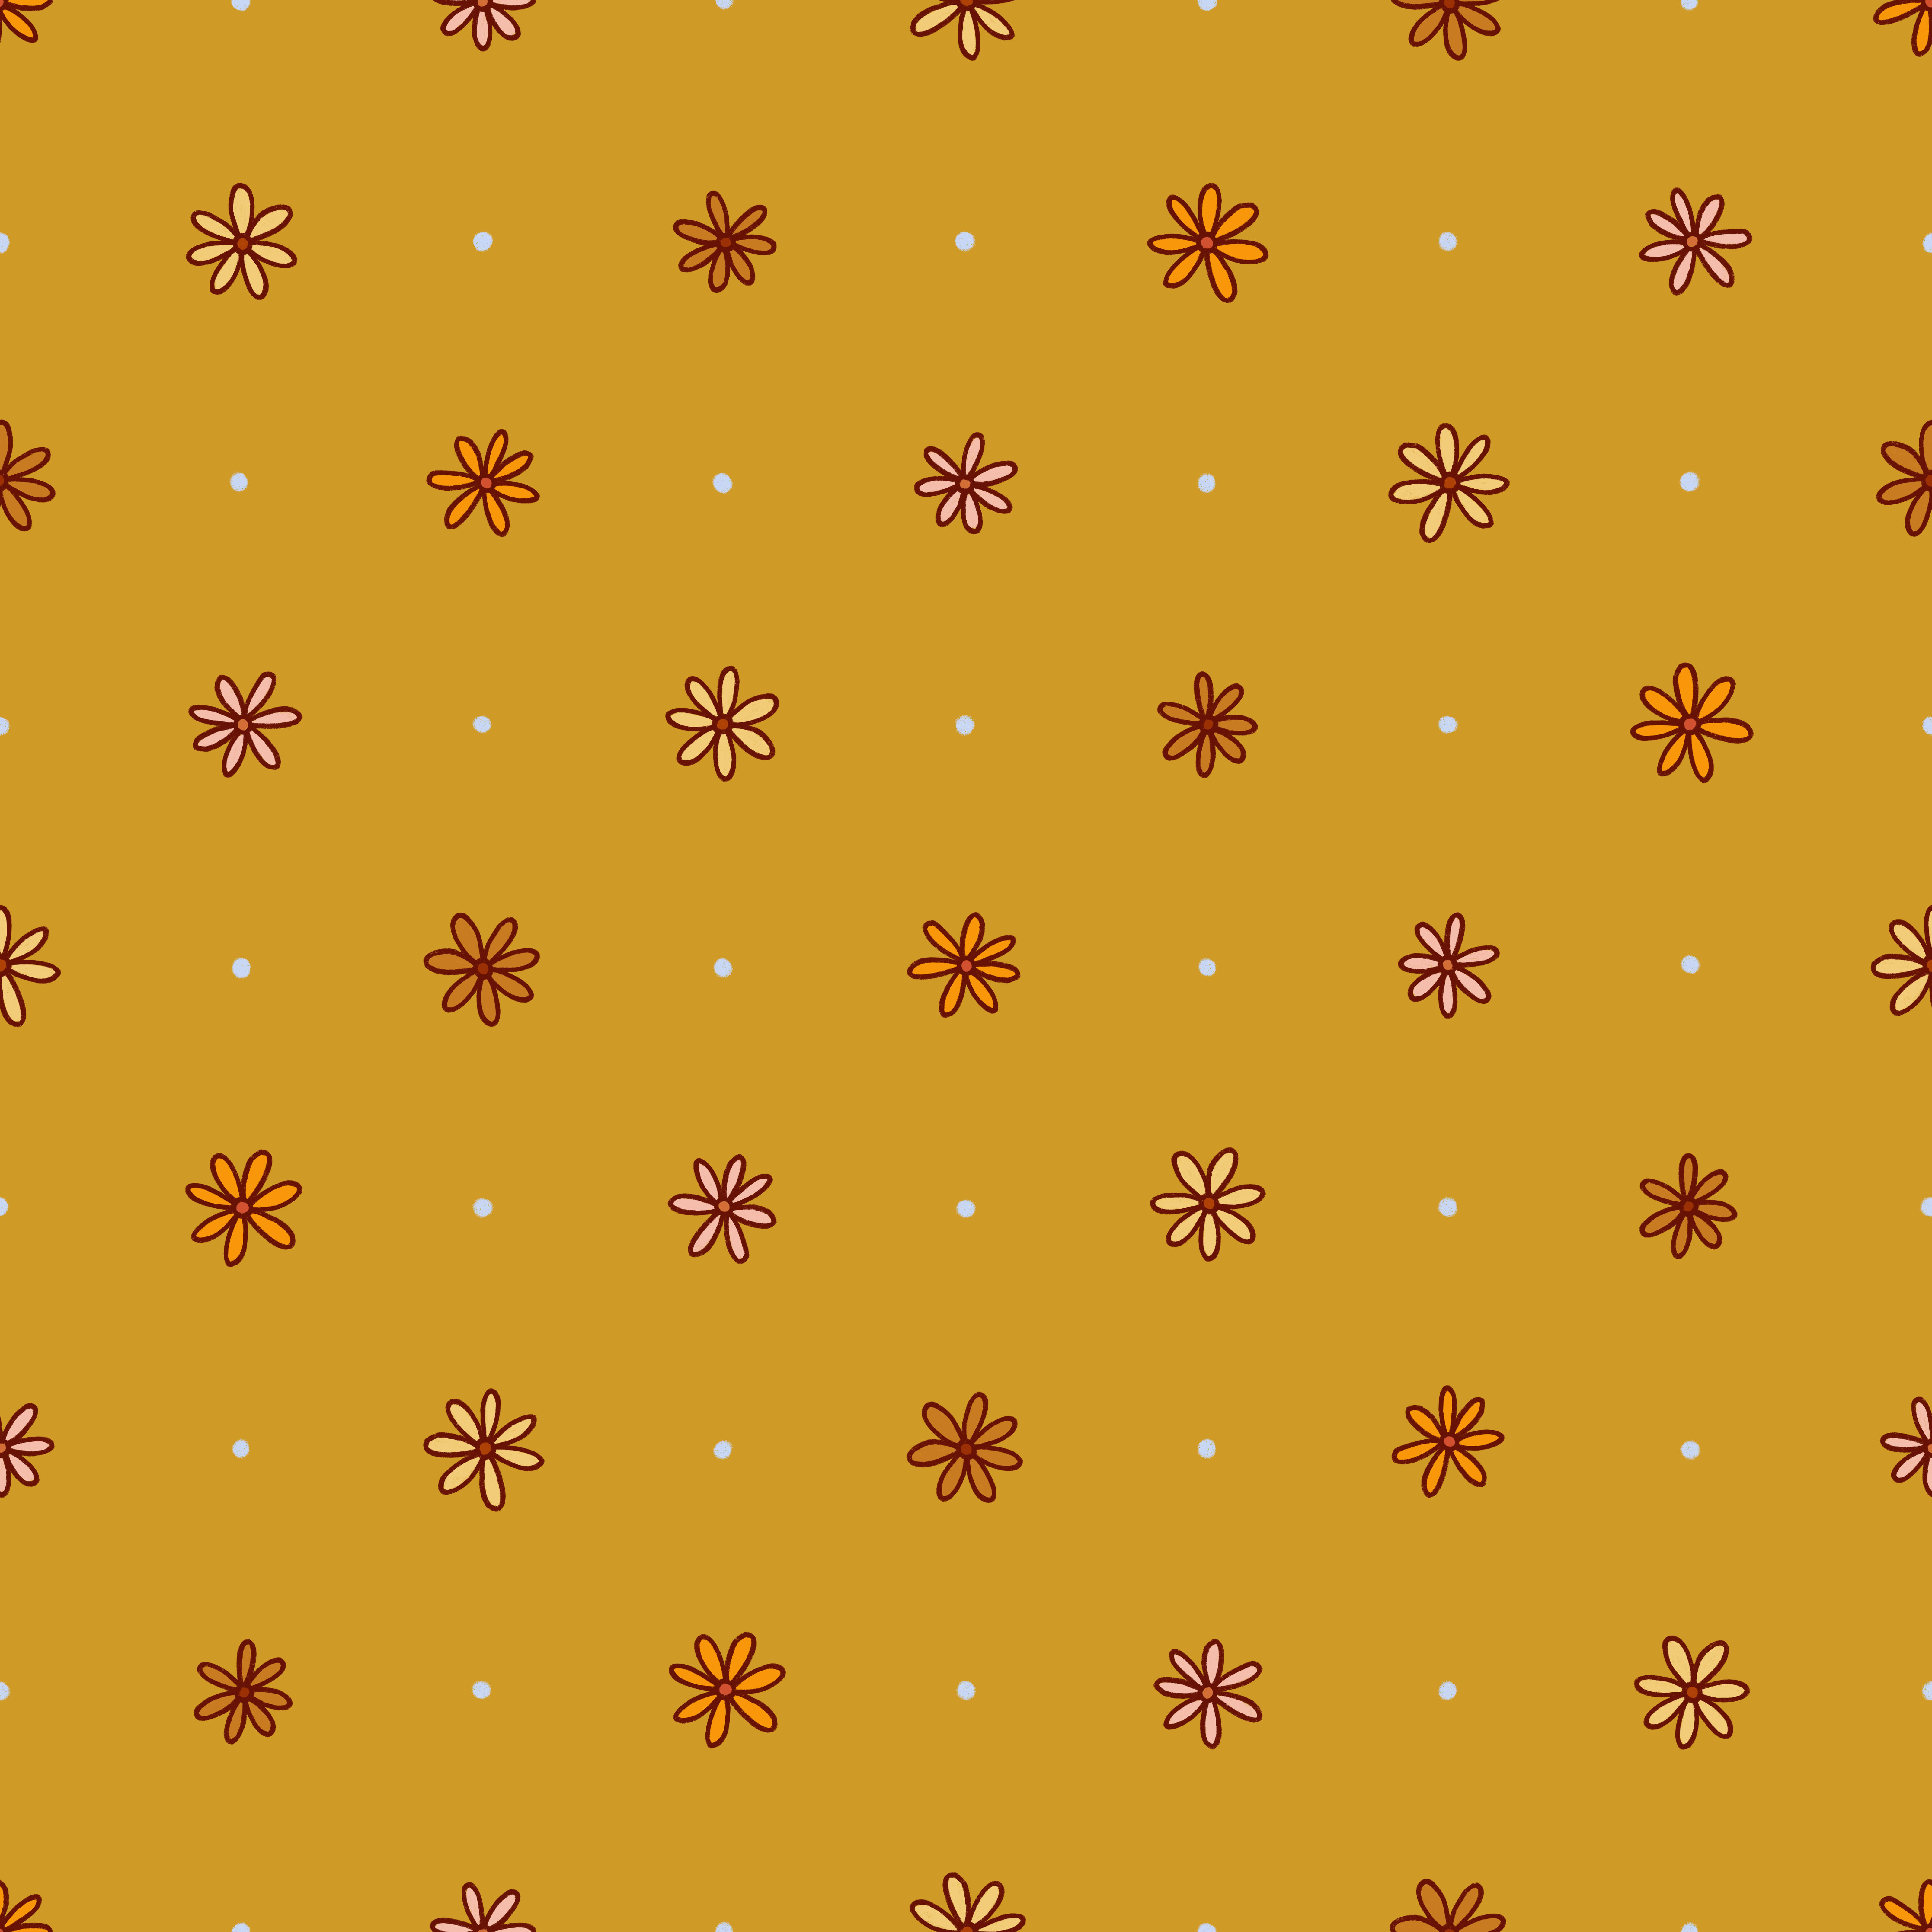 crisp, cozy autumn fall surface pattern collection 